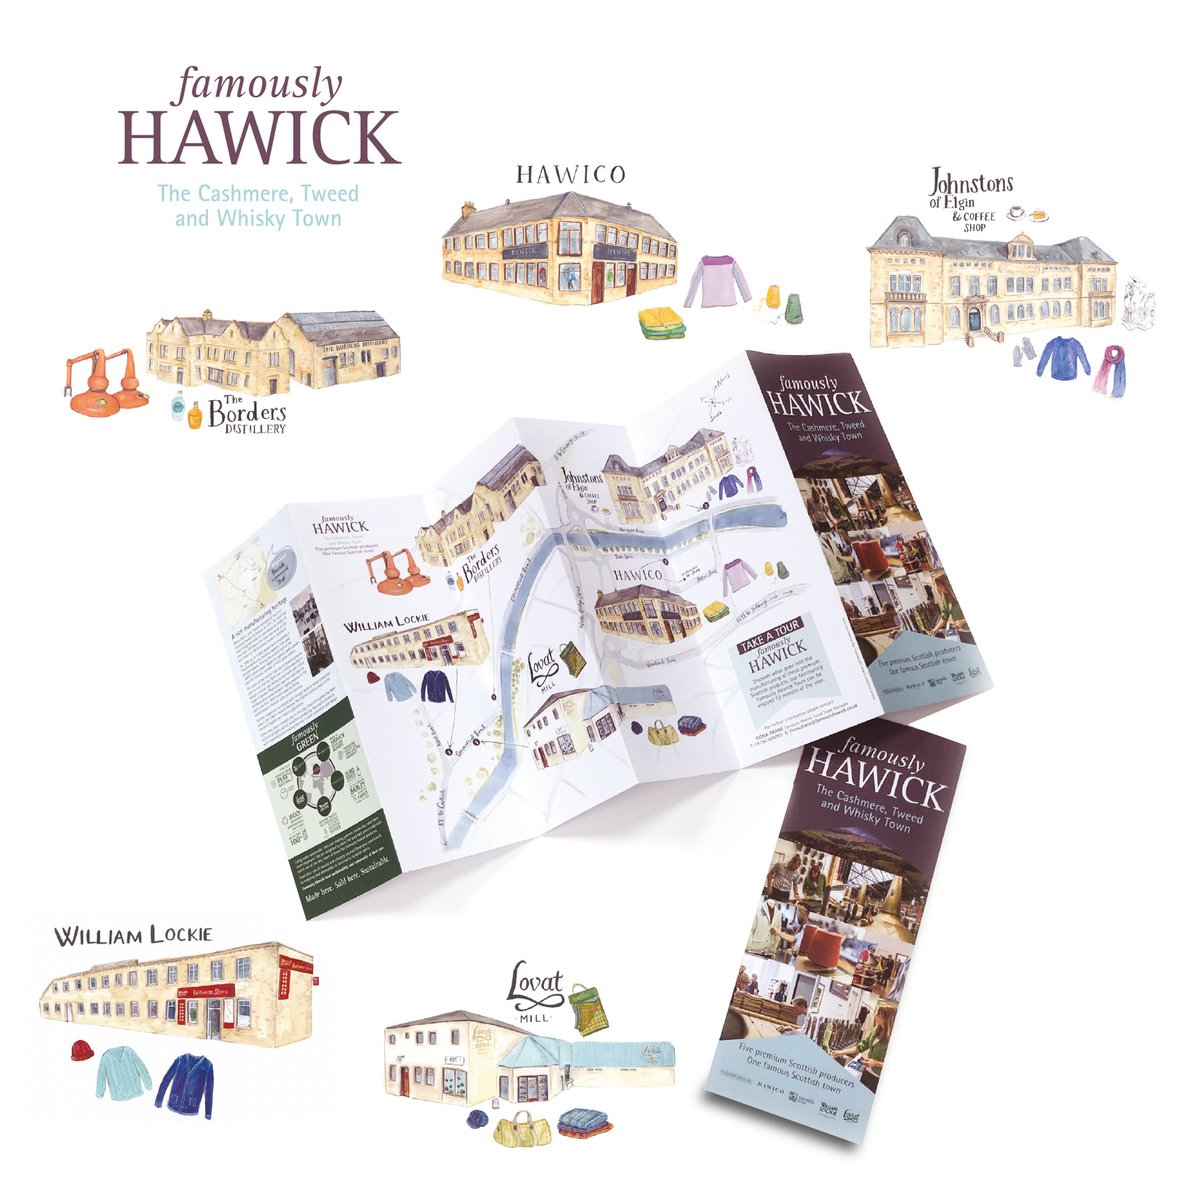 Discover for yourself what fashion houses, designers and discerning visitors have known for more than a century and source luxurious goods in the very place where they were created. Made here. Sold here. Unmissable. #scotlandstartshere #famouslyhawick